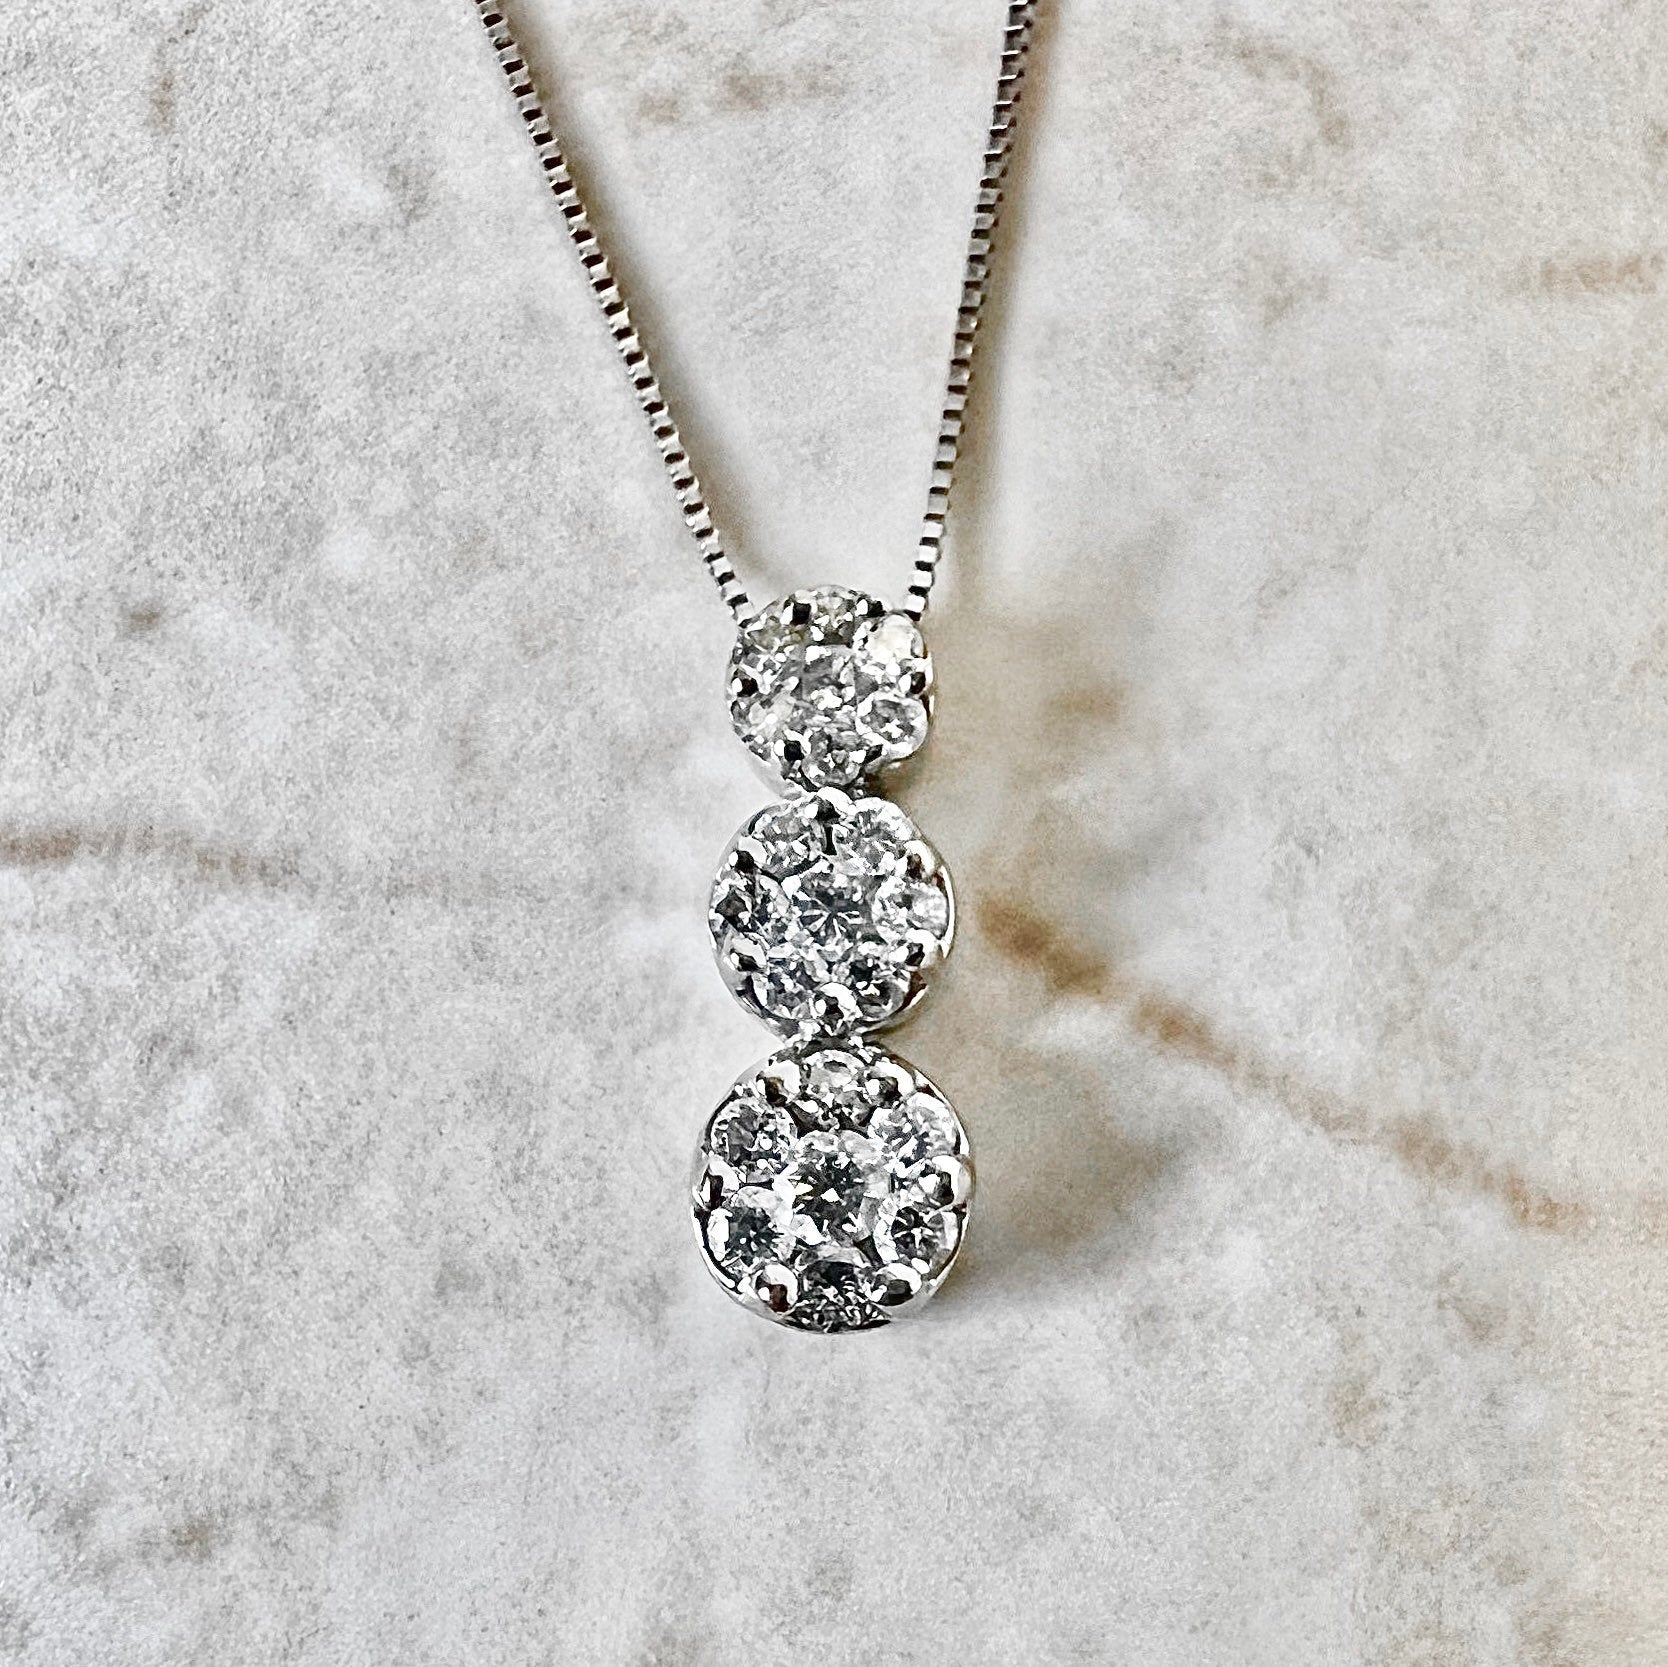 14K Pave Diamond Pendant Necklace - White Gold Pendant - Cluster Diamond Pendant - Birthday Gift For Her - Christmas Gift - Holiday Gift